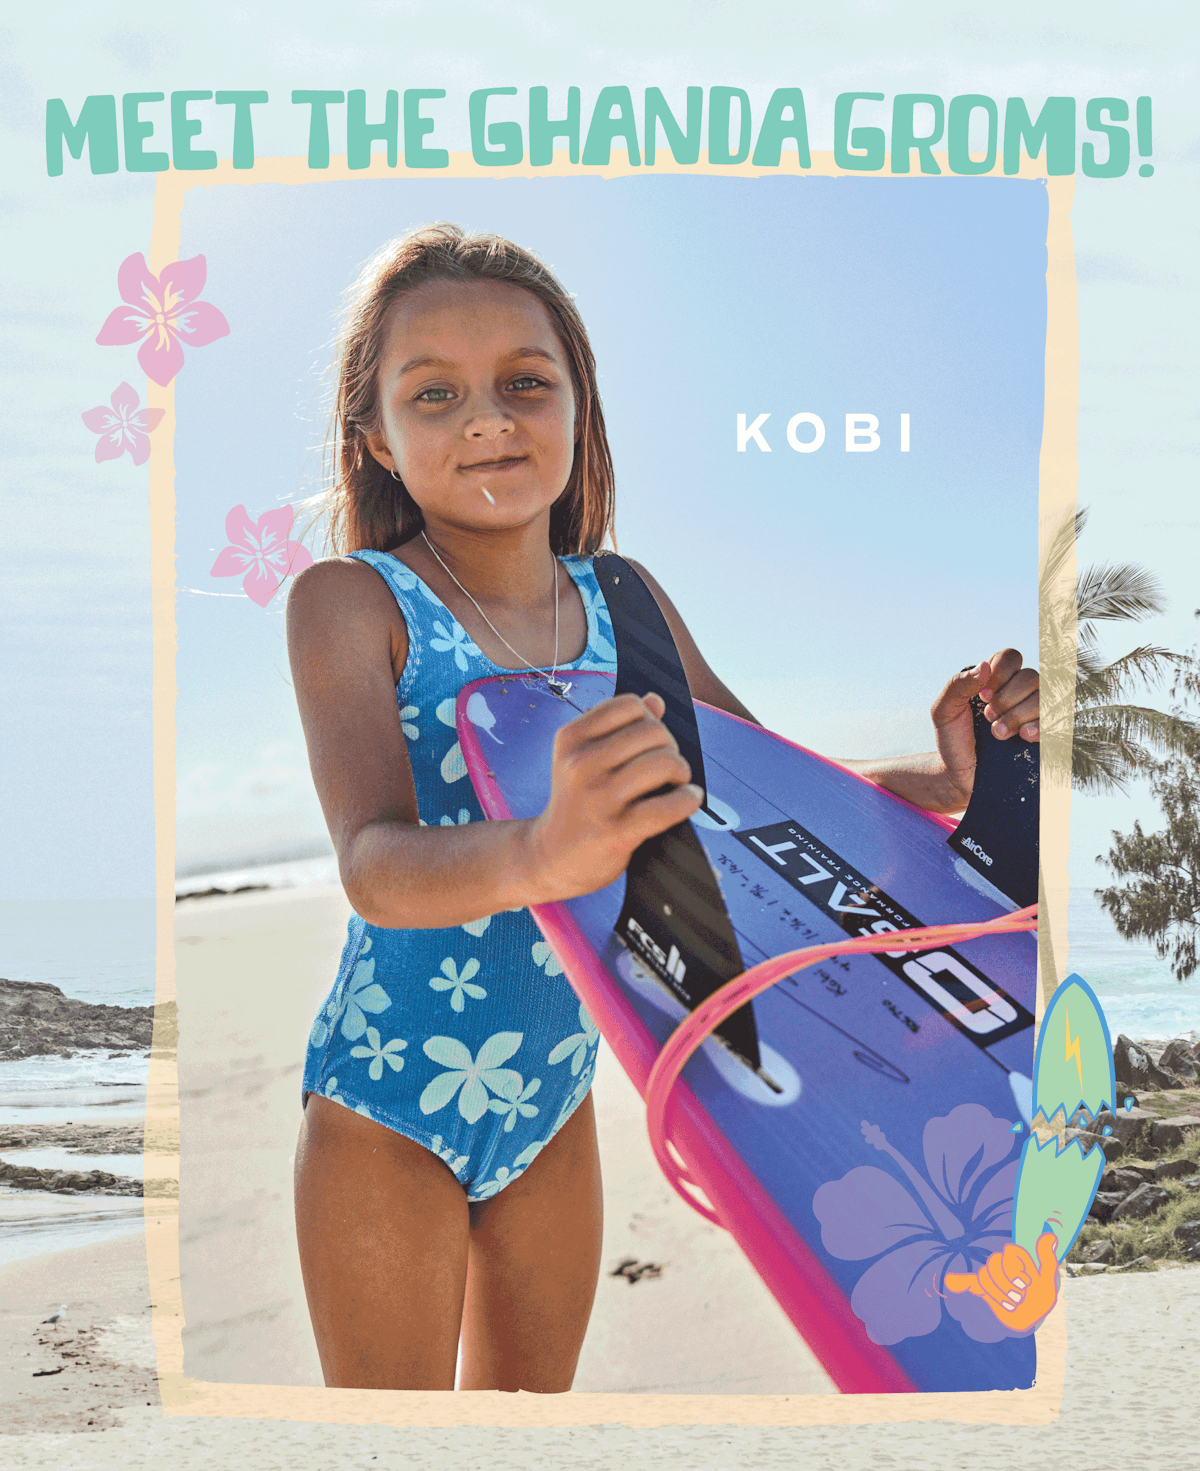 A gif of 3 surfer girls at the beach from our grom squad